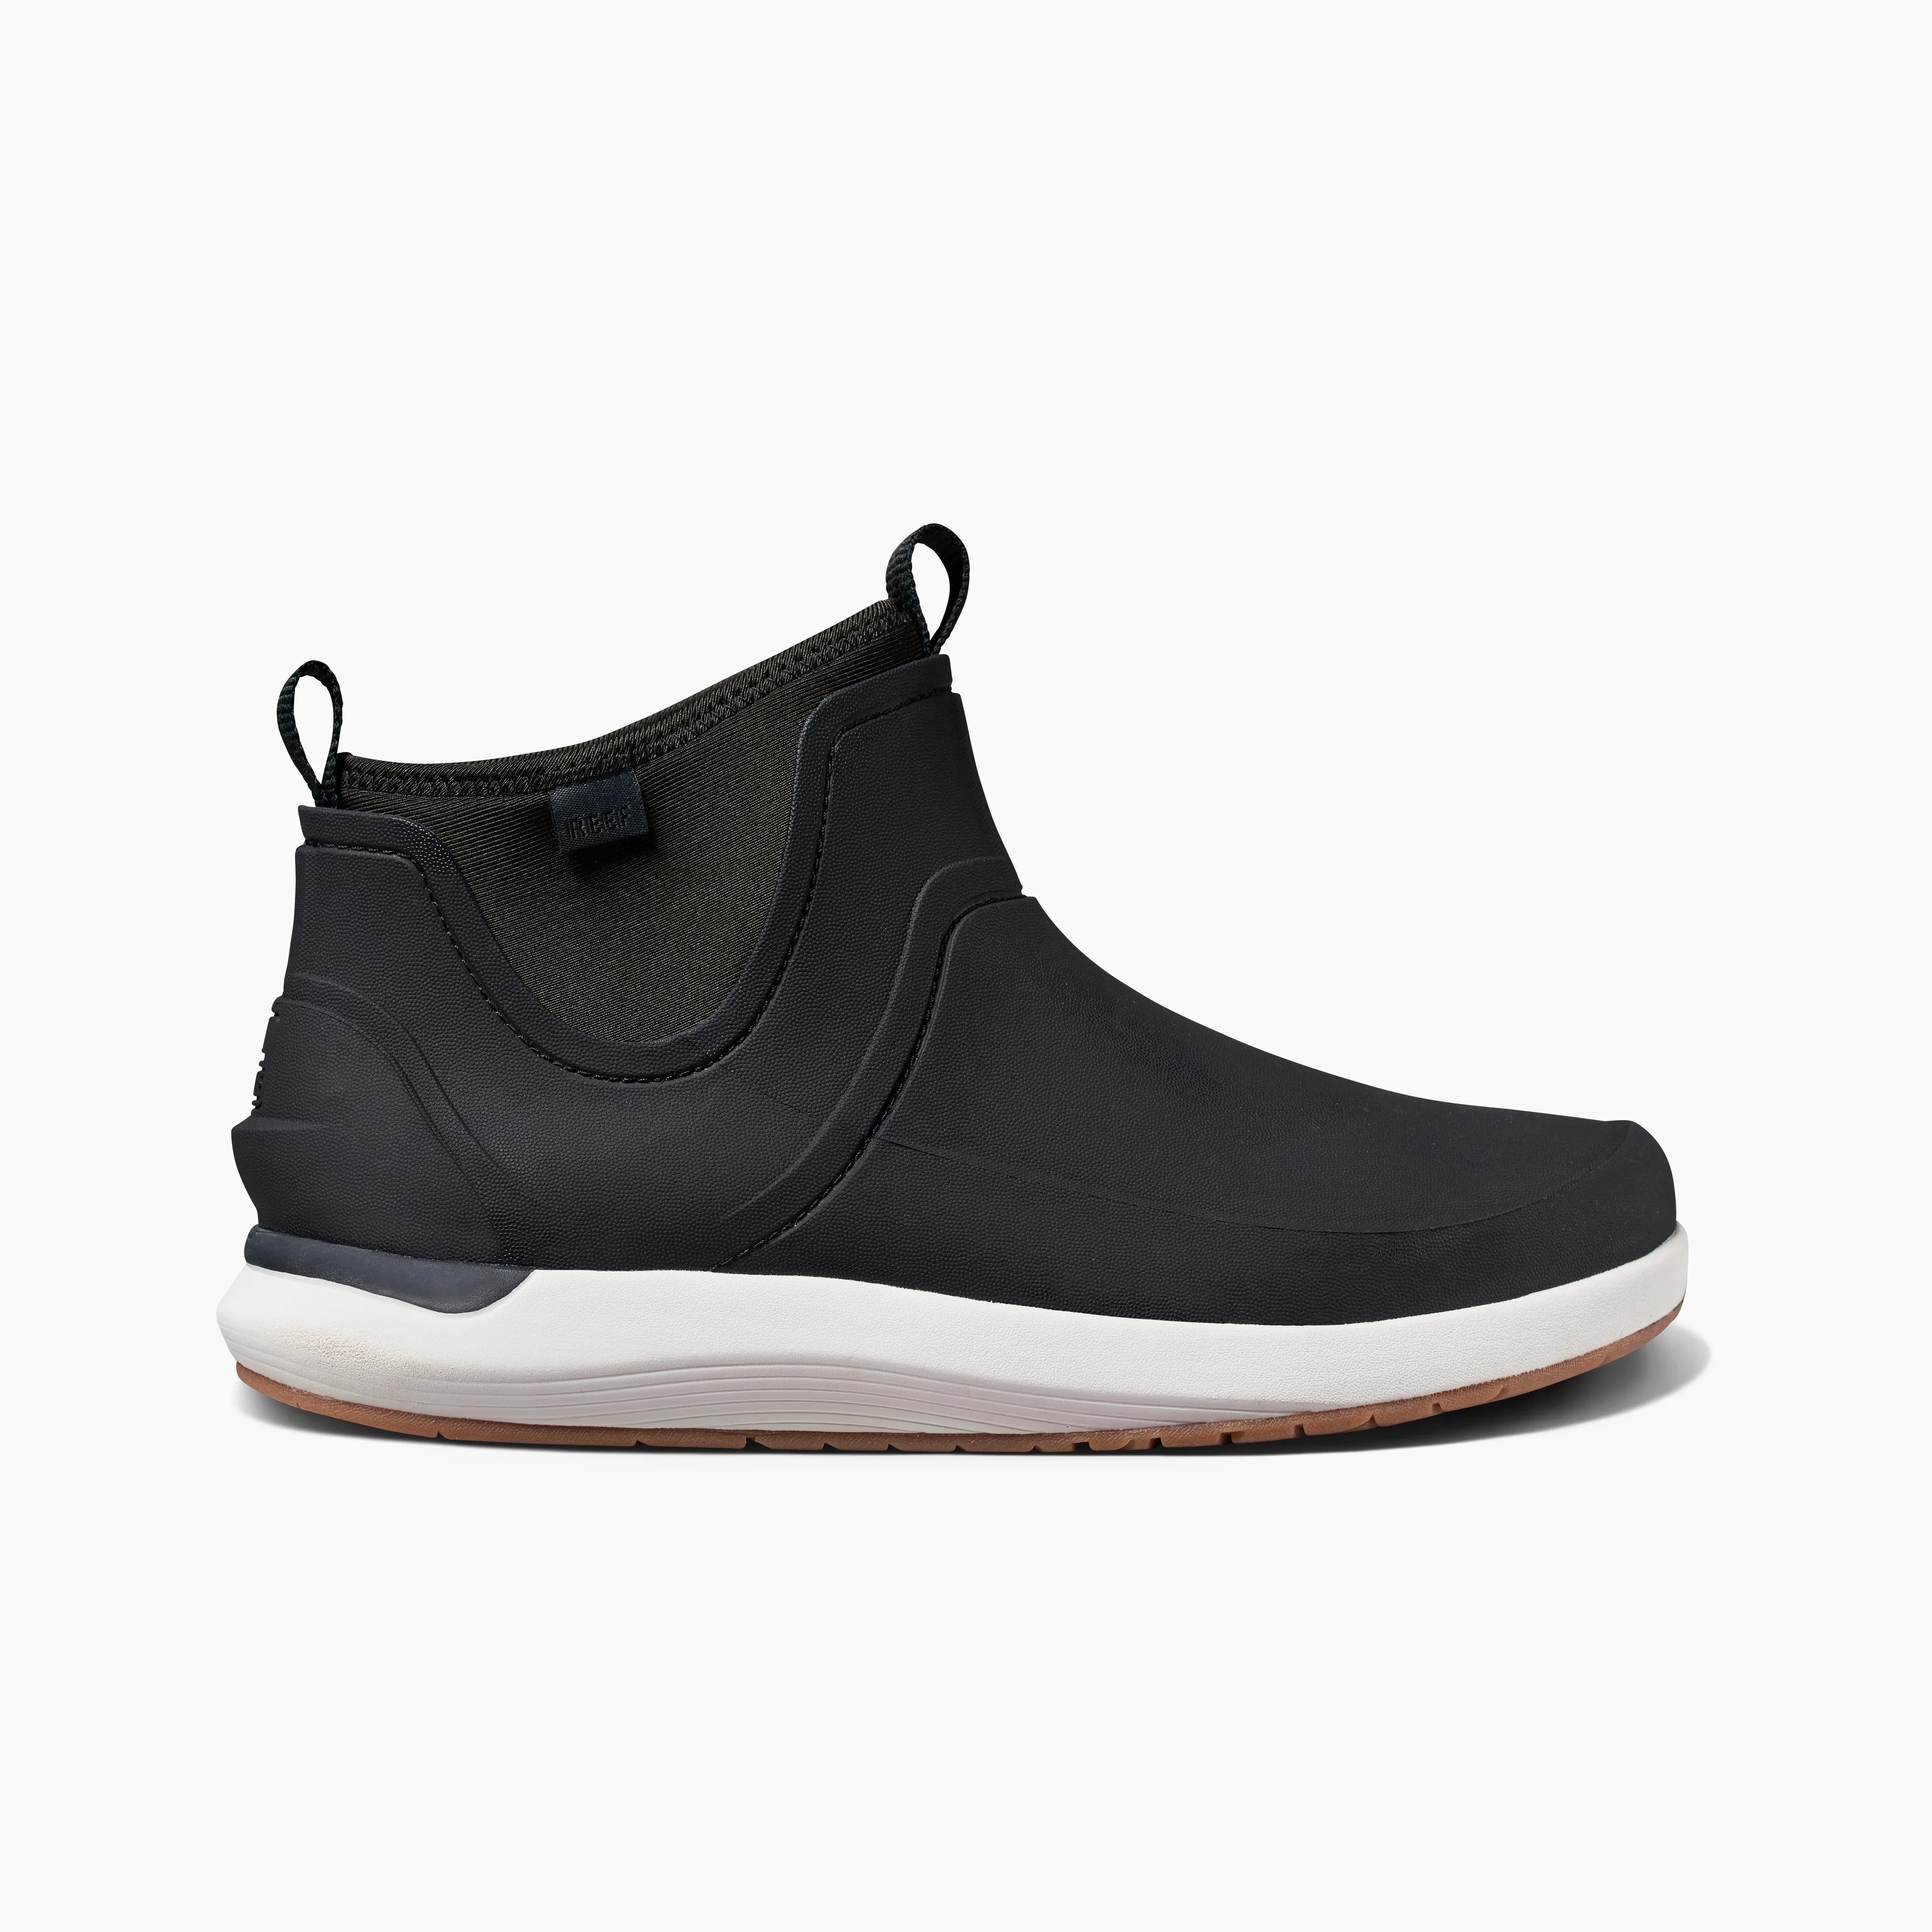 Black water friendly ankle boots (Swellsole Scallywag)